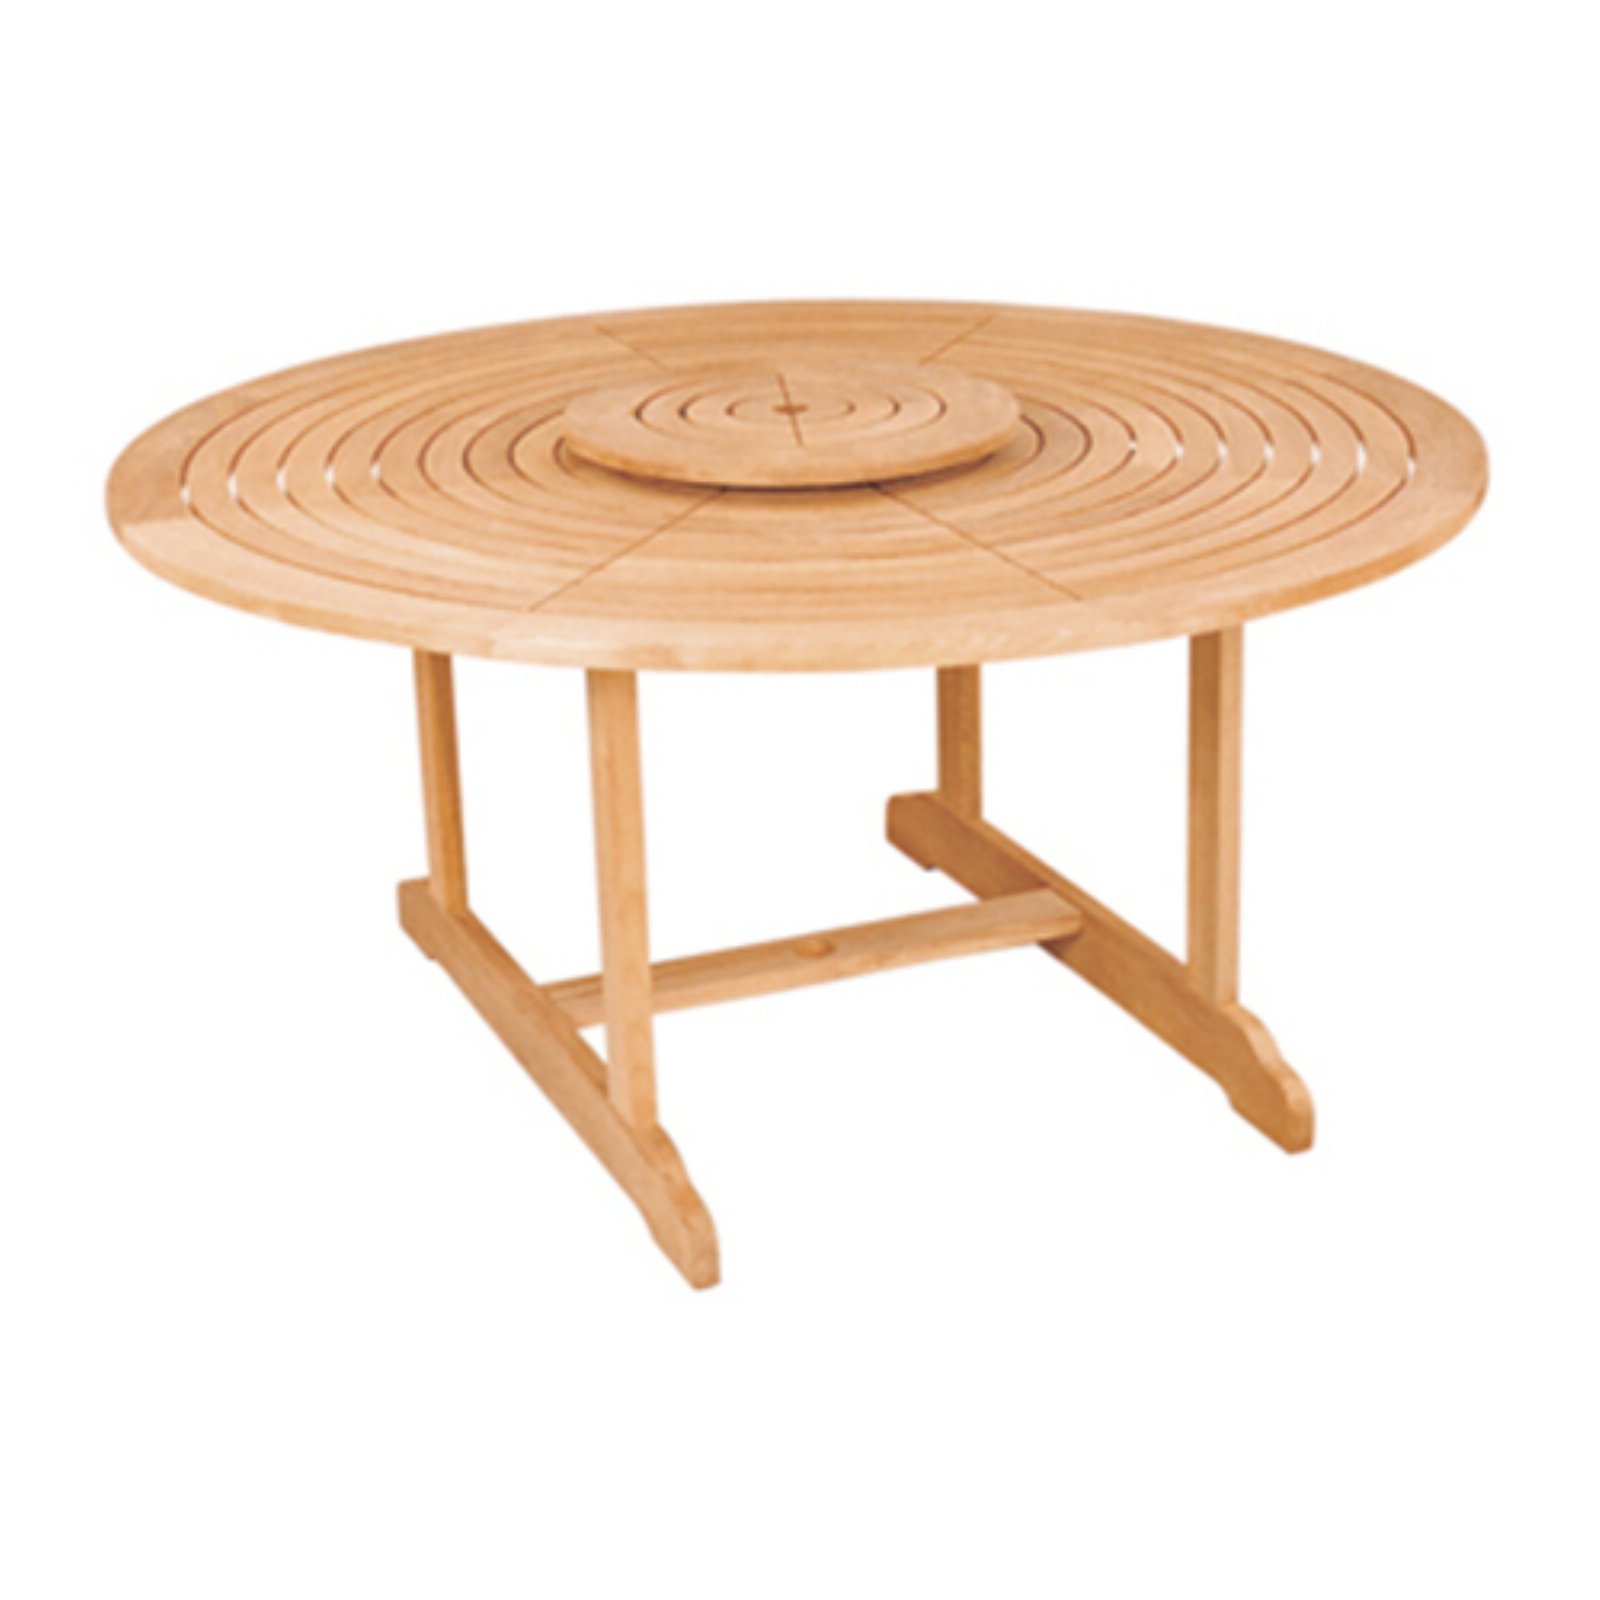 HiTeak Furniture Royal 59" Round Teak Wooden Patio Dining Table with Lazy Susan - image 1 of 3